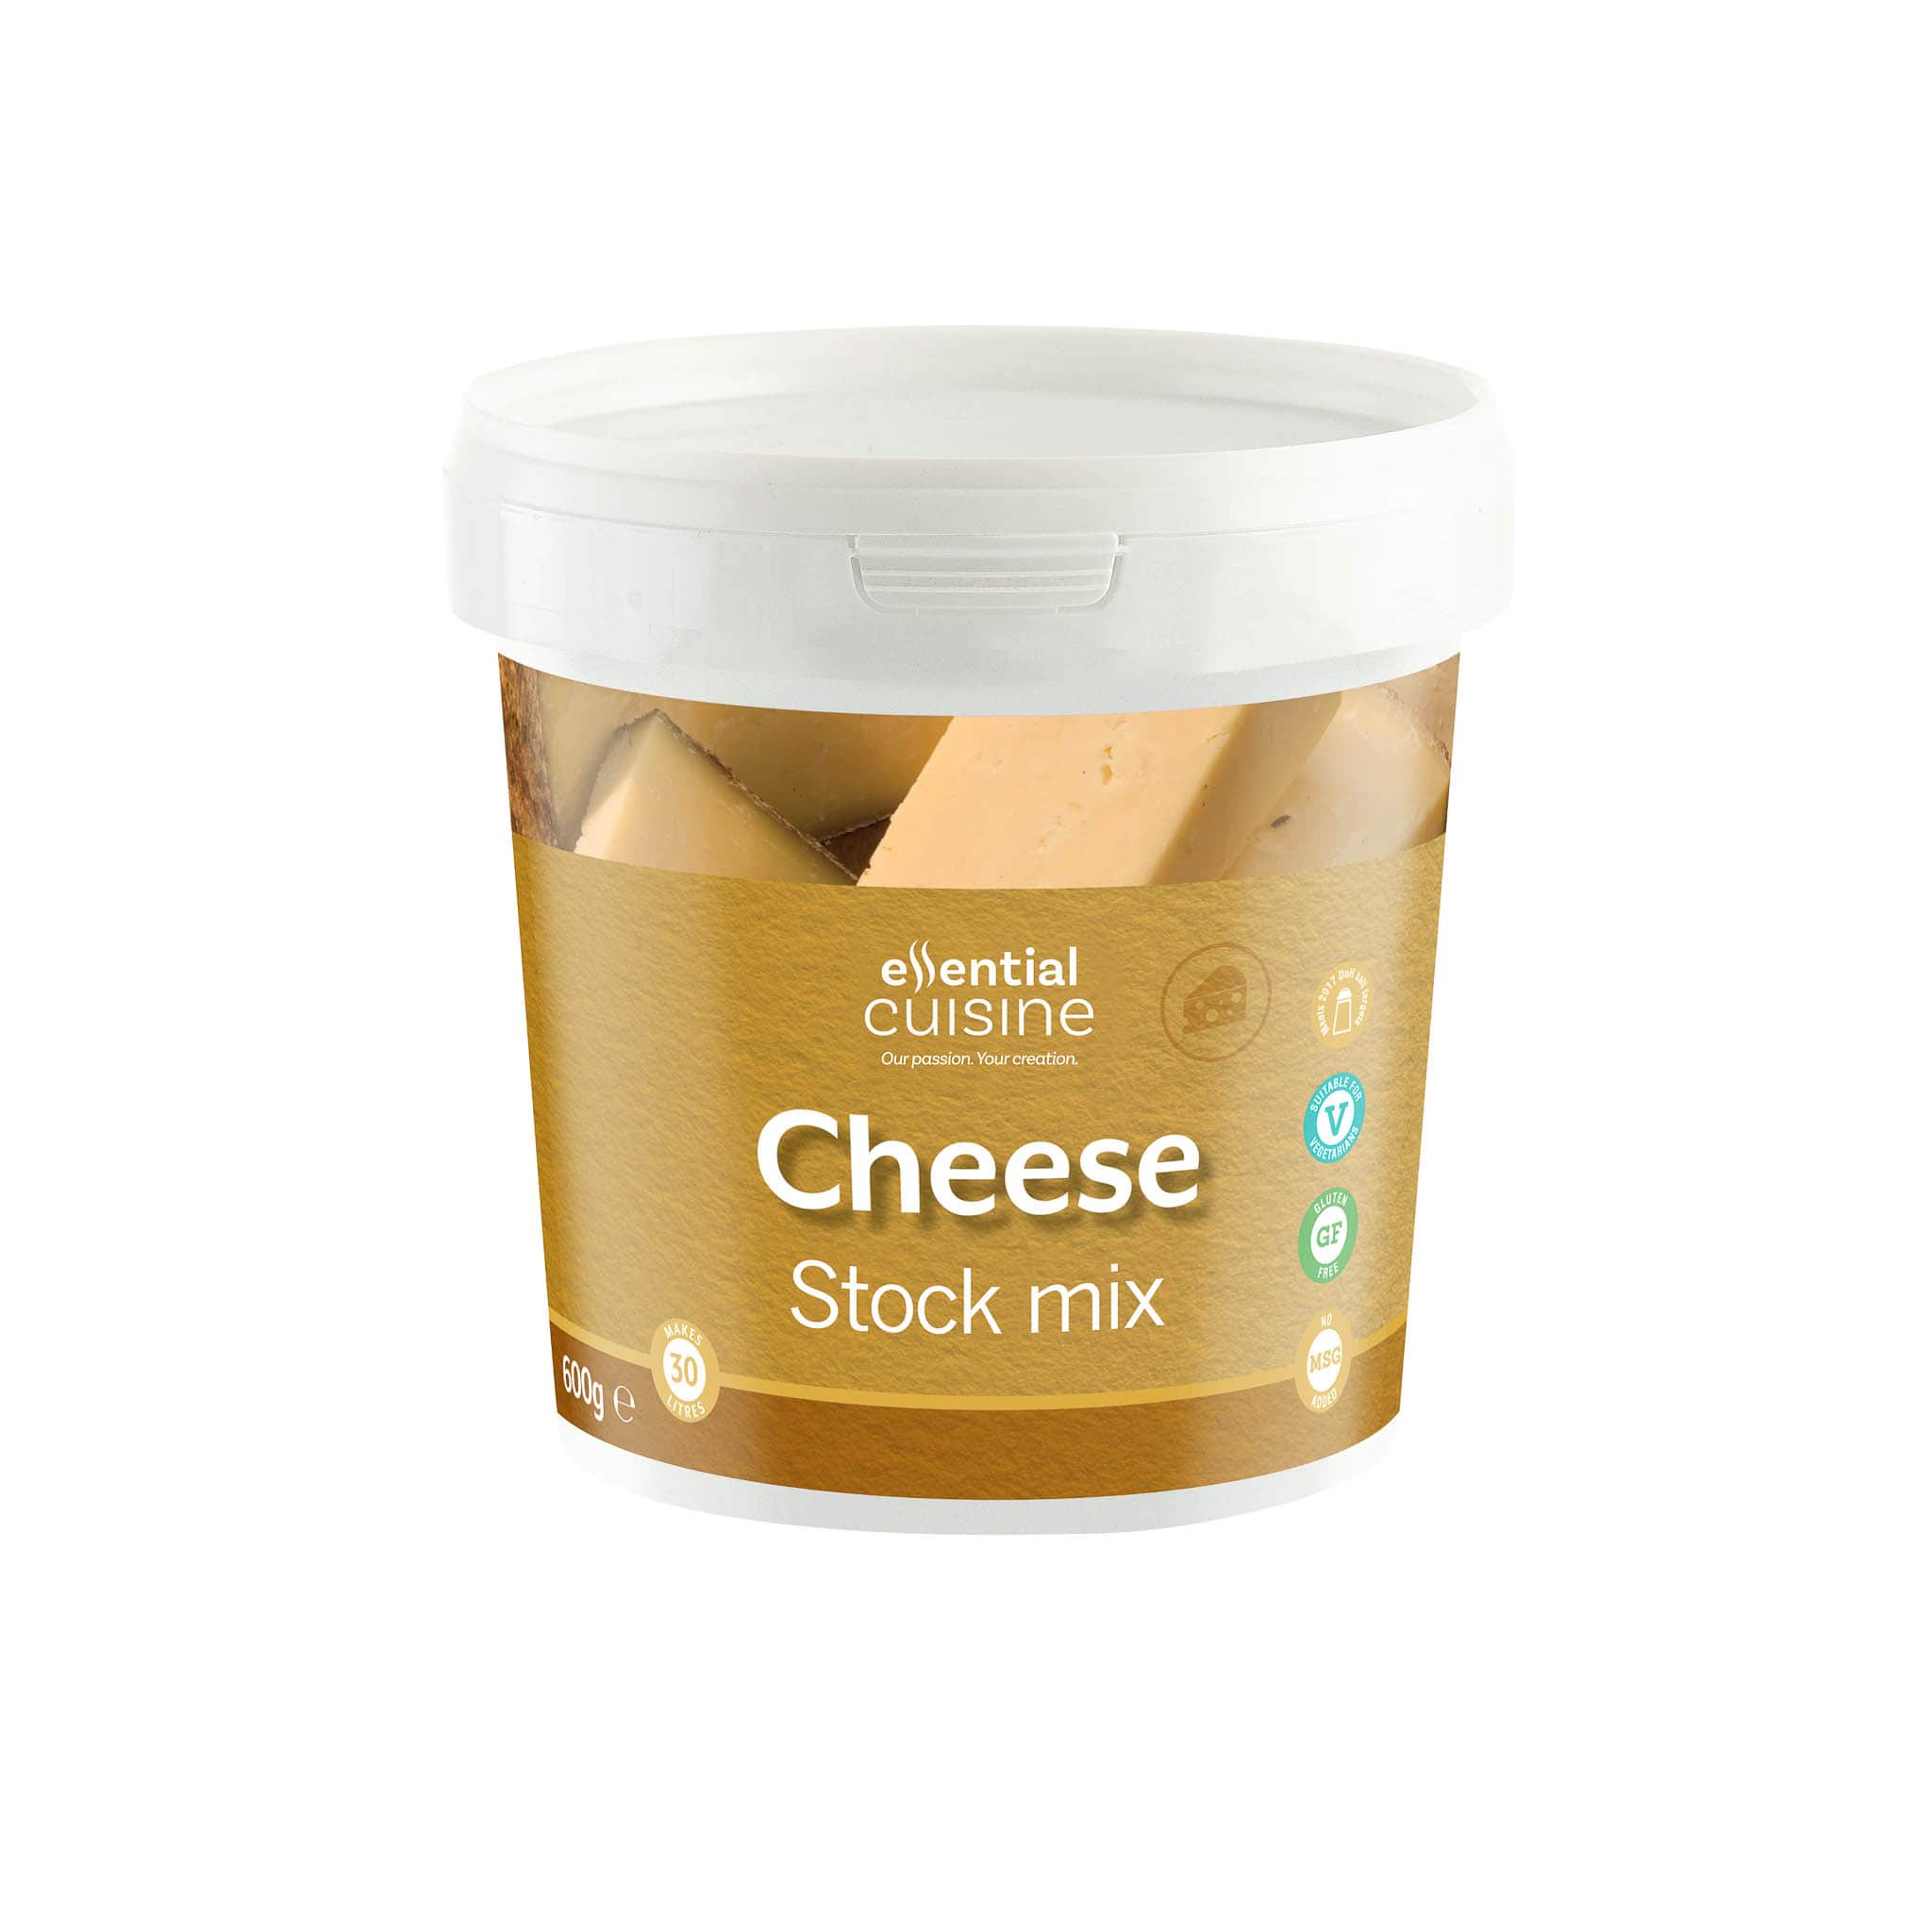 Essential Cuisine Cheese Stock Mix 800g